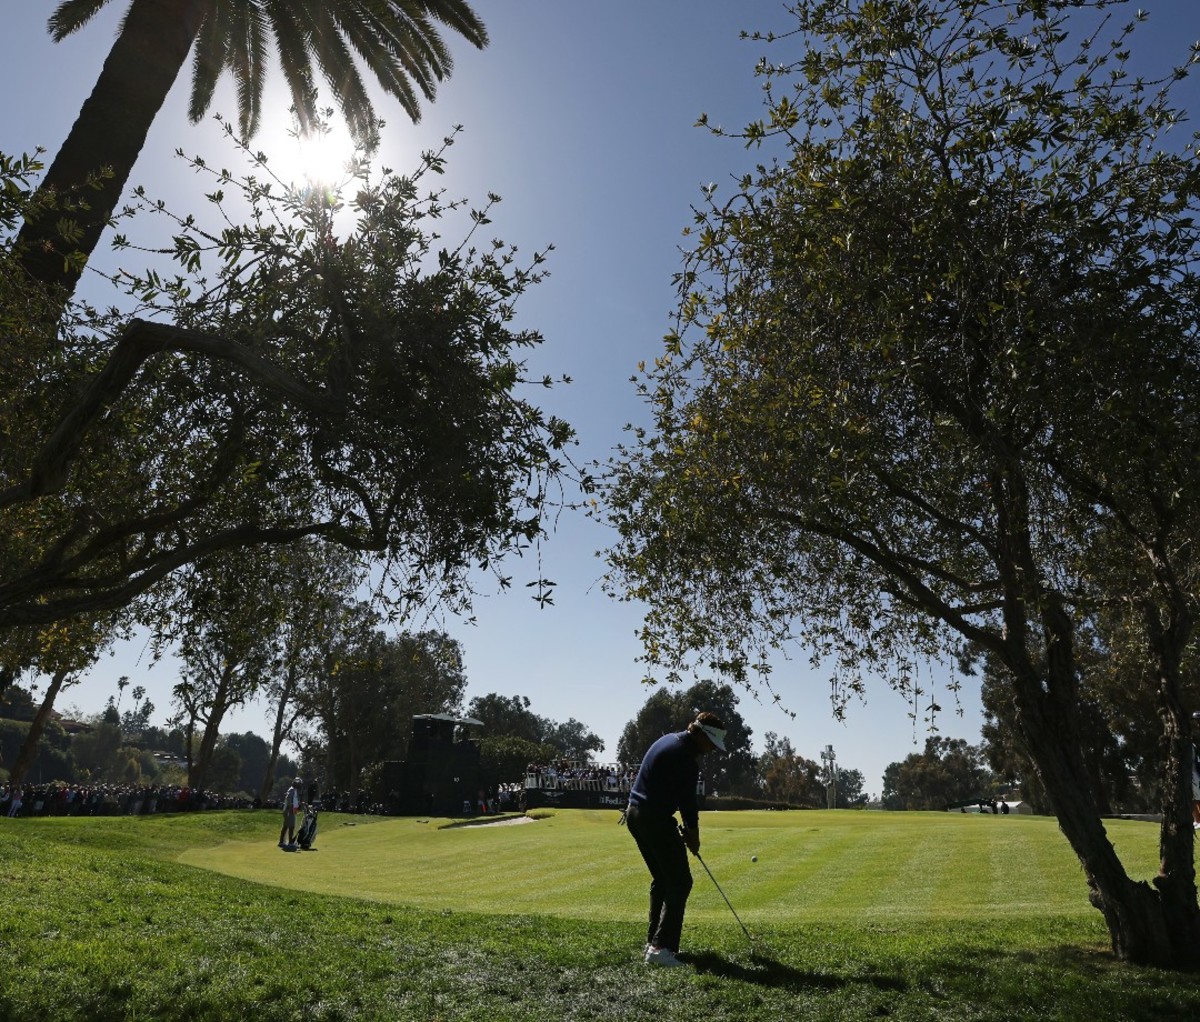 Keith Mitchell plays his shot on the tenth hole during the final round of the Genesis Invitational at Riviera Country Club on February 19, 2023